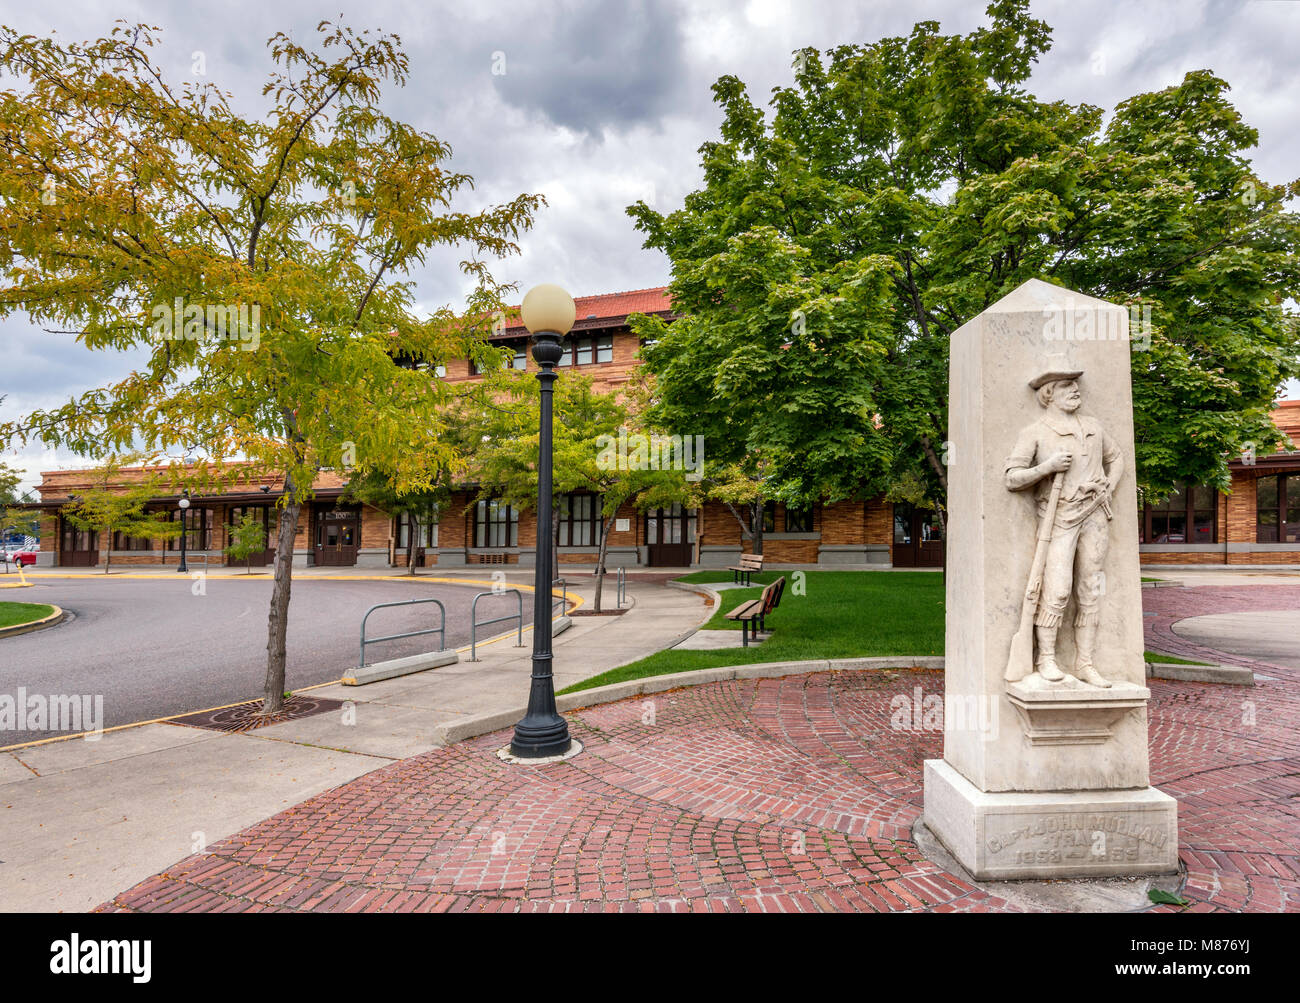 Statue of Captain John Mullan, created by Edgar S. Paxson, 1914, to mark the route of the wagon road he surveyed and built, in Missoula, Montana, USA Stock Photo